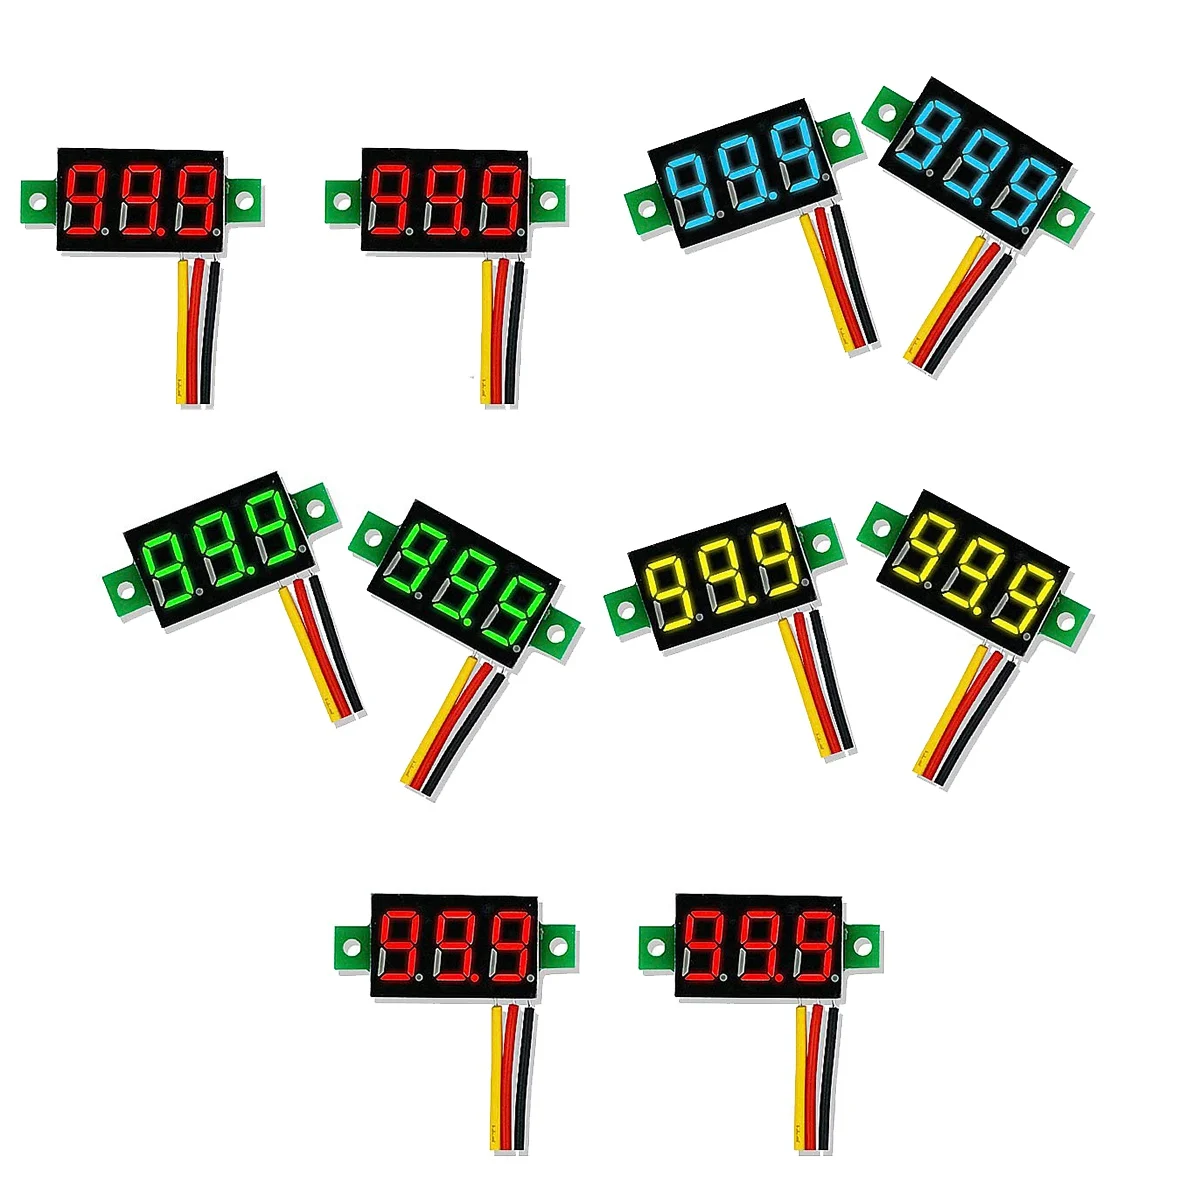 

Mini DC Voltmeter Display 3-Wire DC 0-100V Voltage Tester 10PCS 0.28 Inch LED Panel 4 Colors Combined